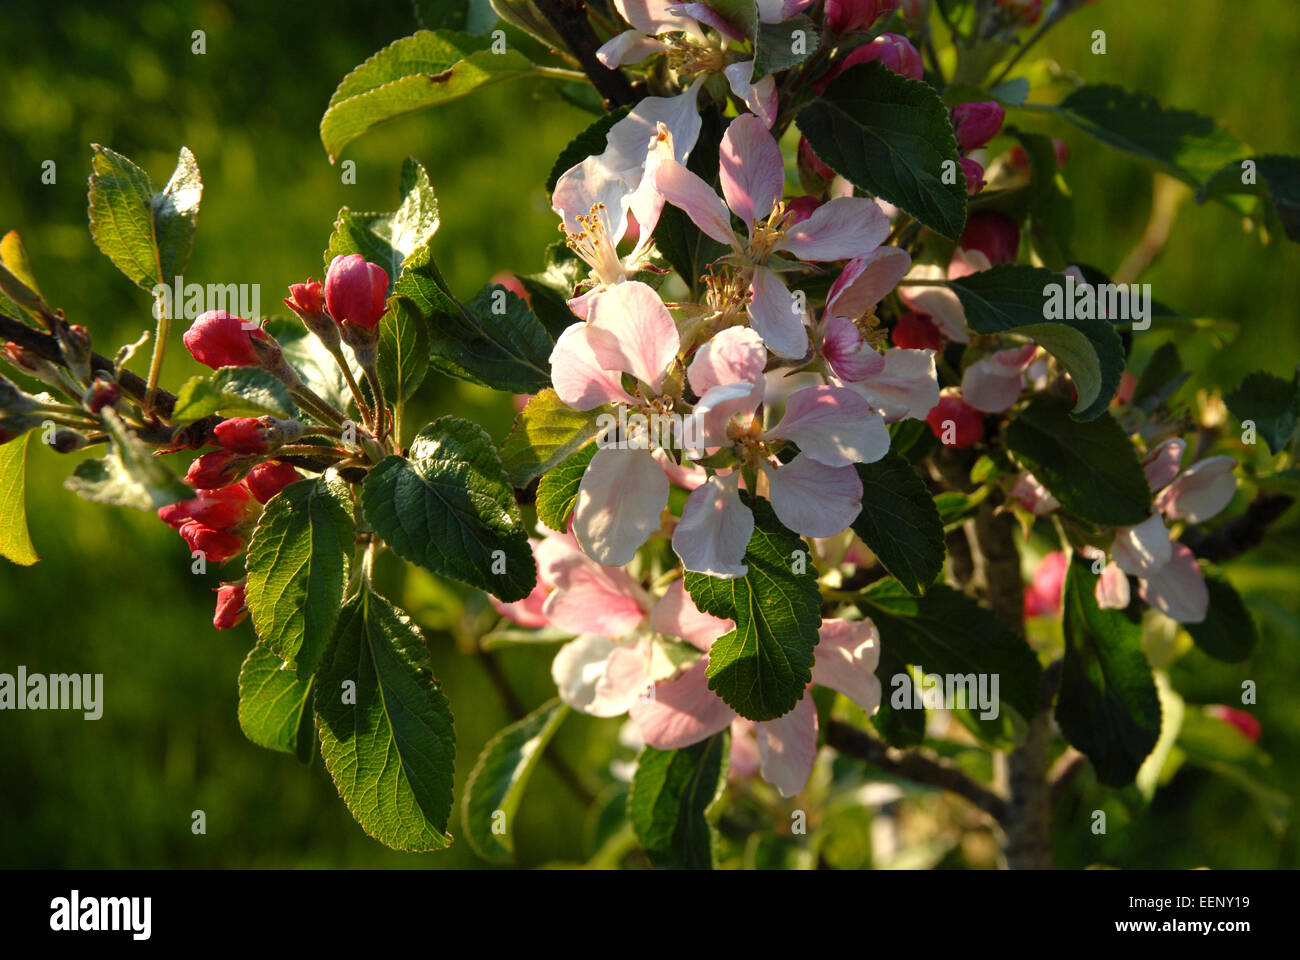 Apple blossom in a garden in Wales, UK Stock Photo